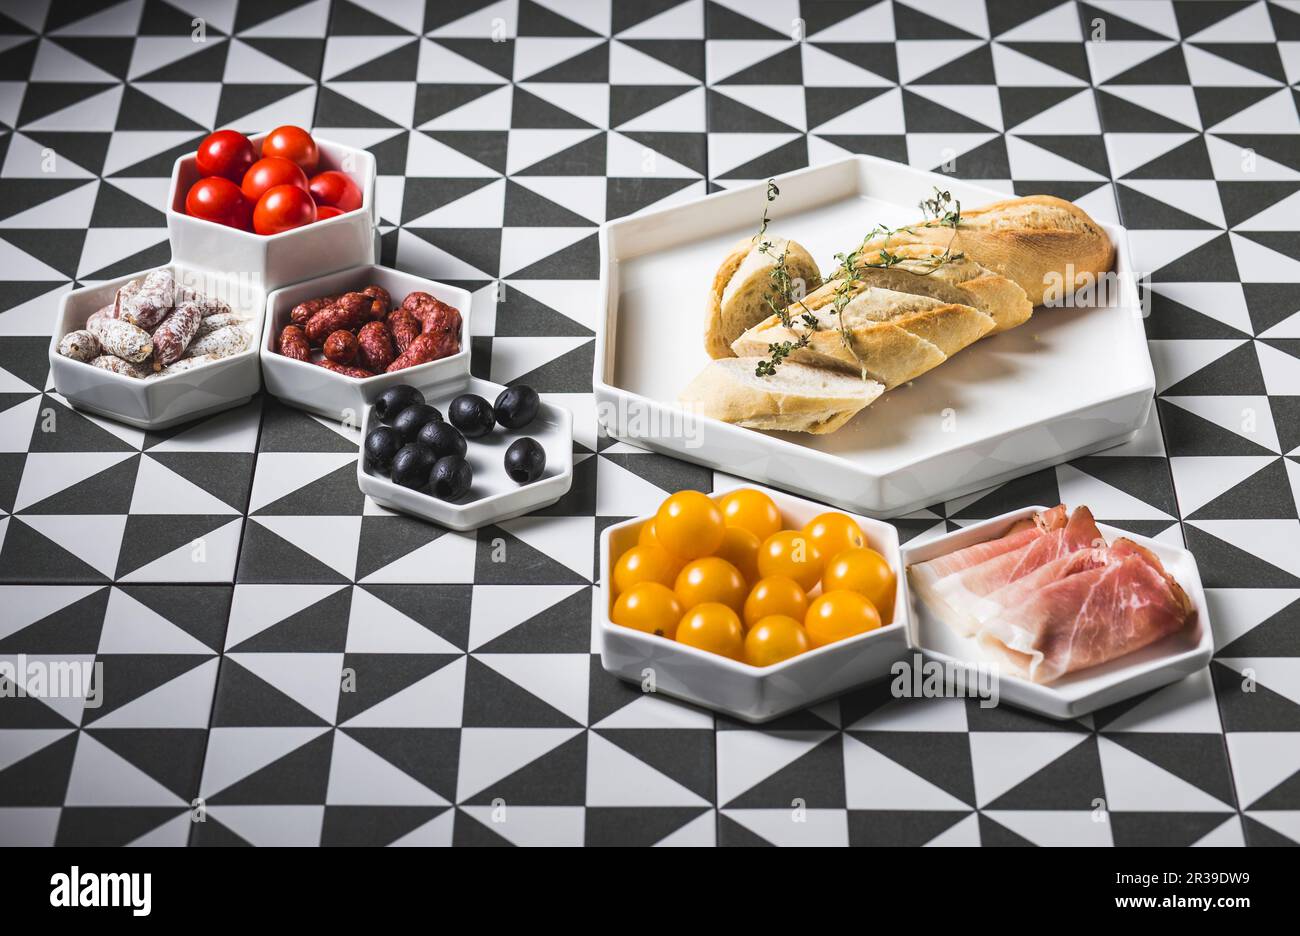 A white baguette with various antipasti on a patterned surface Stock Photo